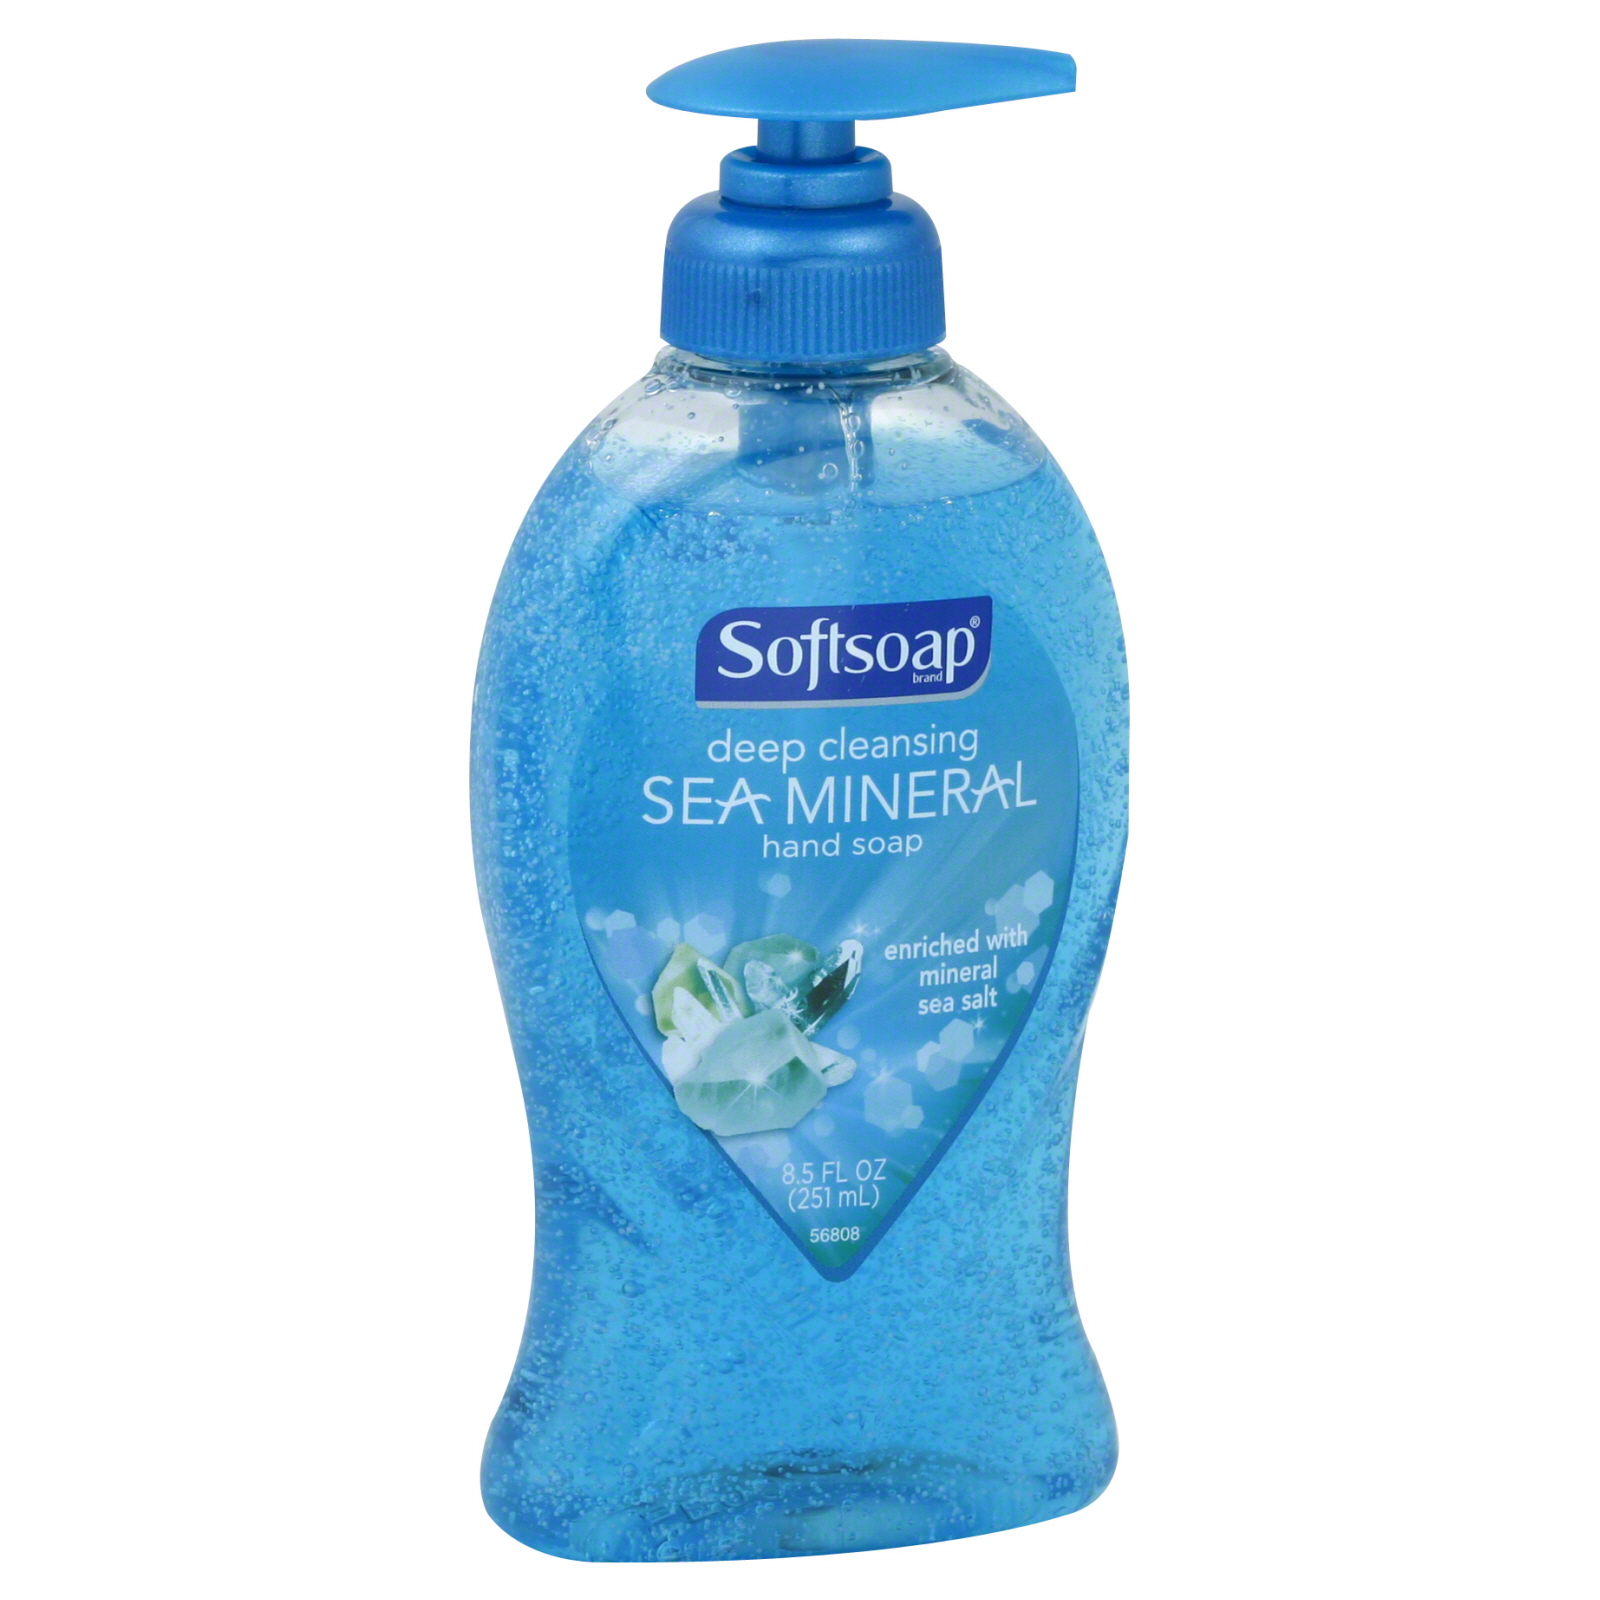 Softsoap Hand Soap, Deep Cleansing, Sea Mineral, 8.5 fl oz